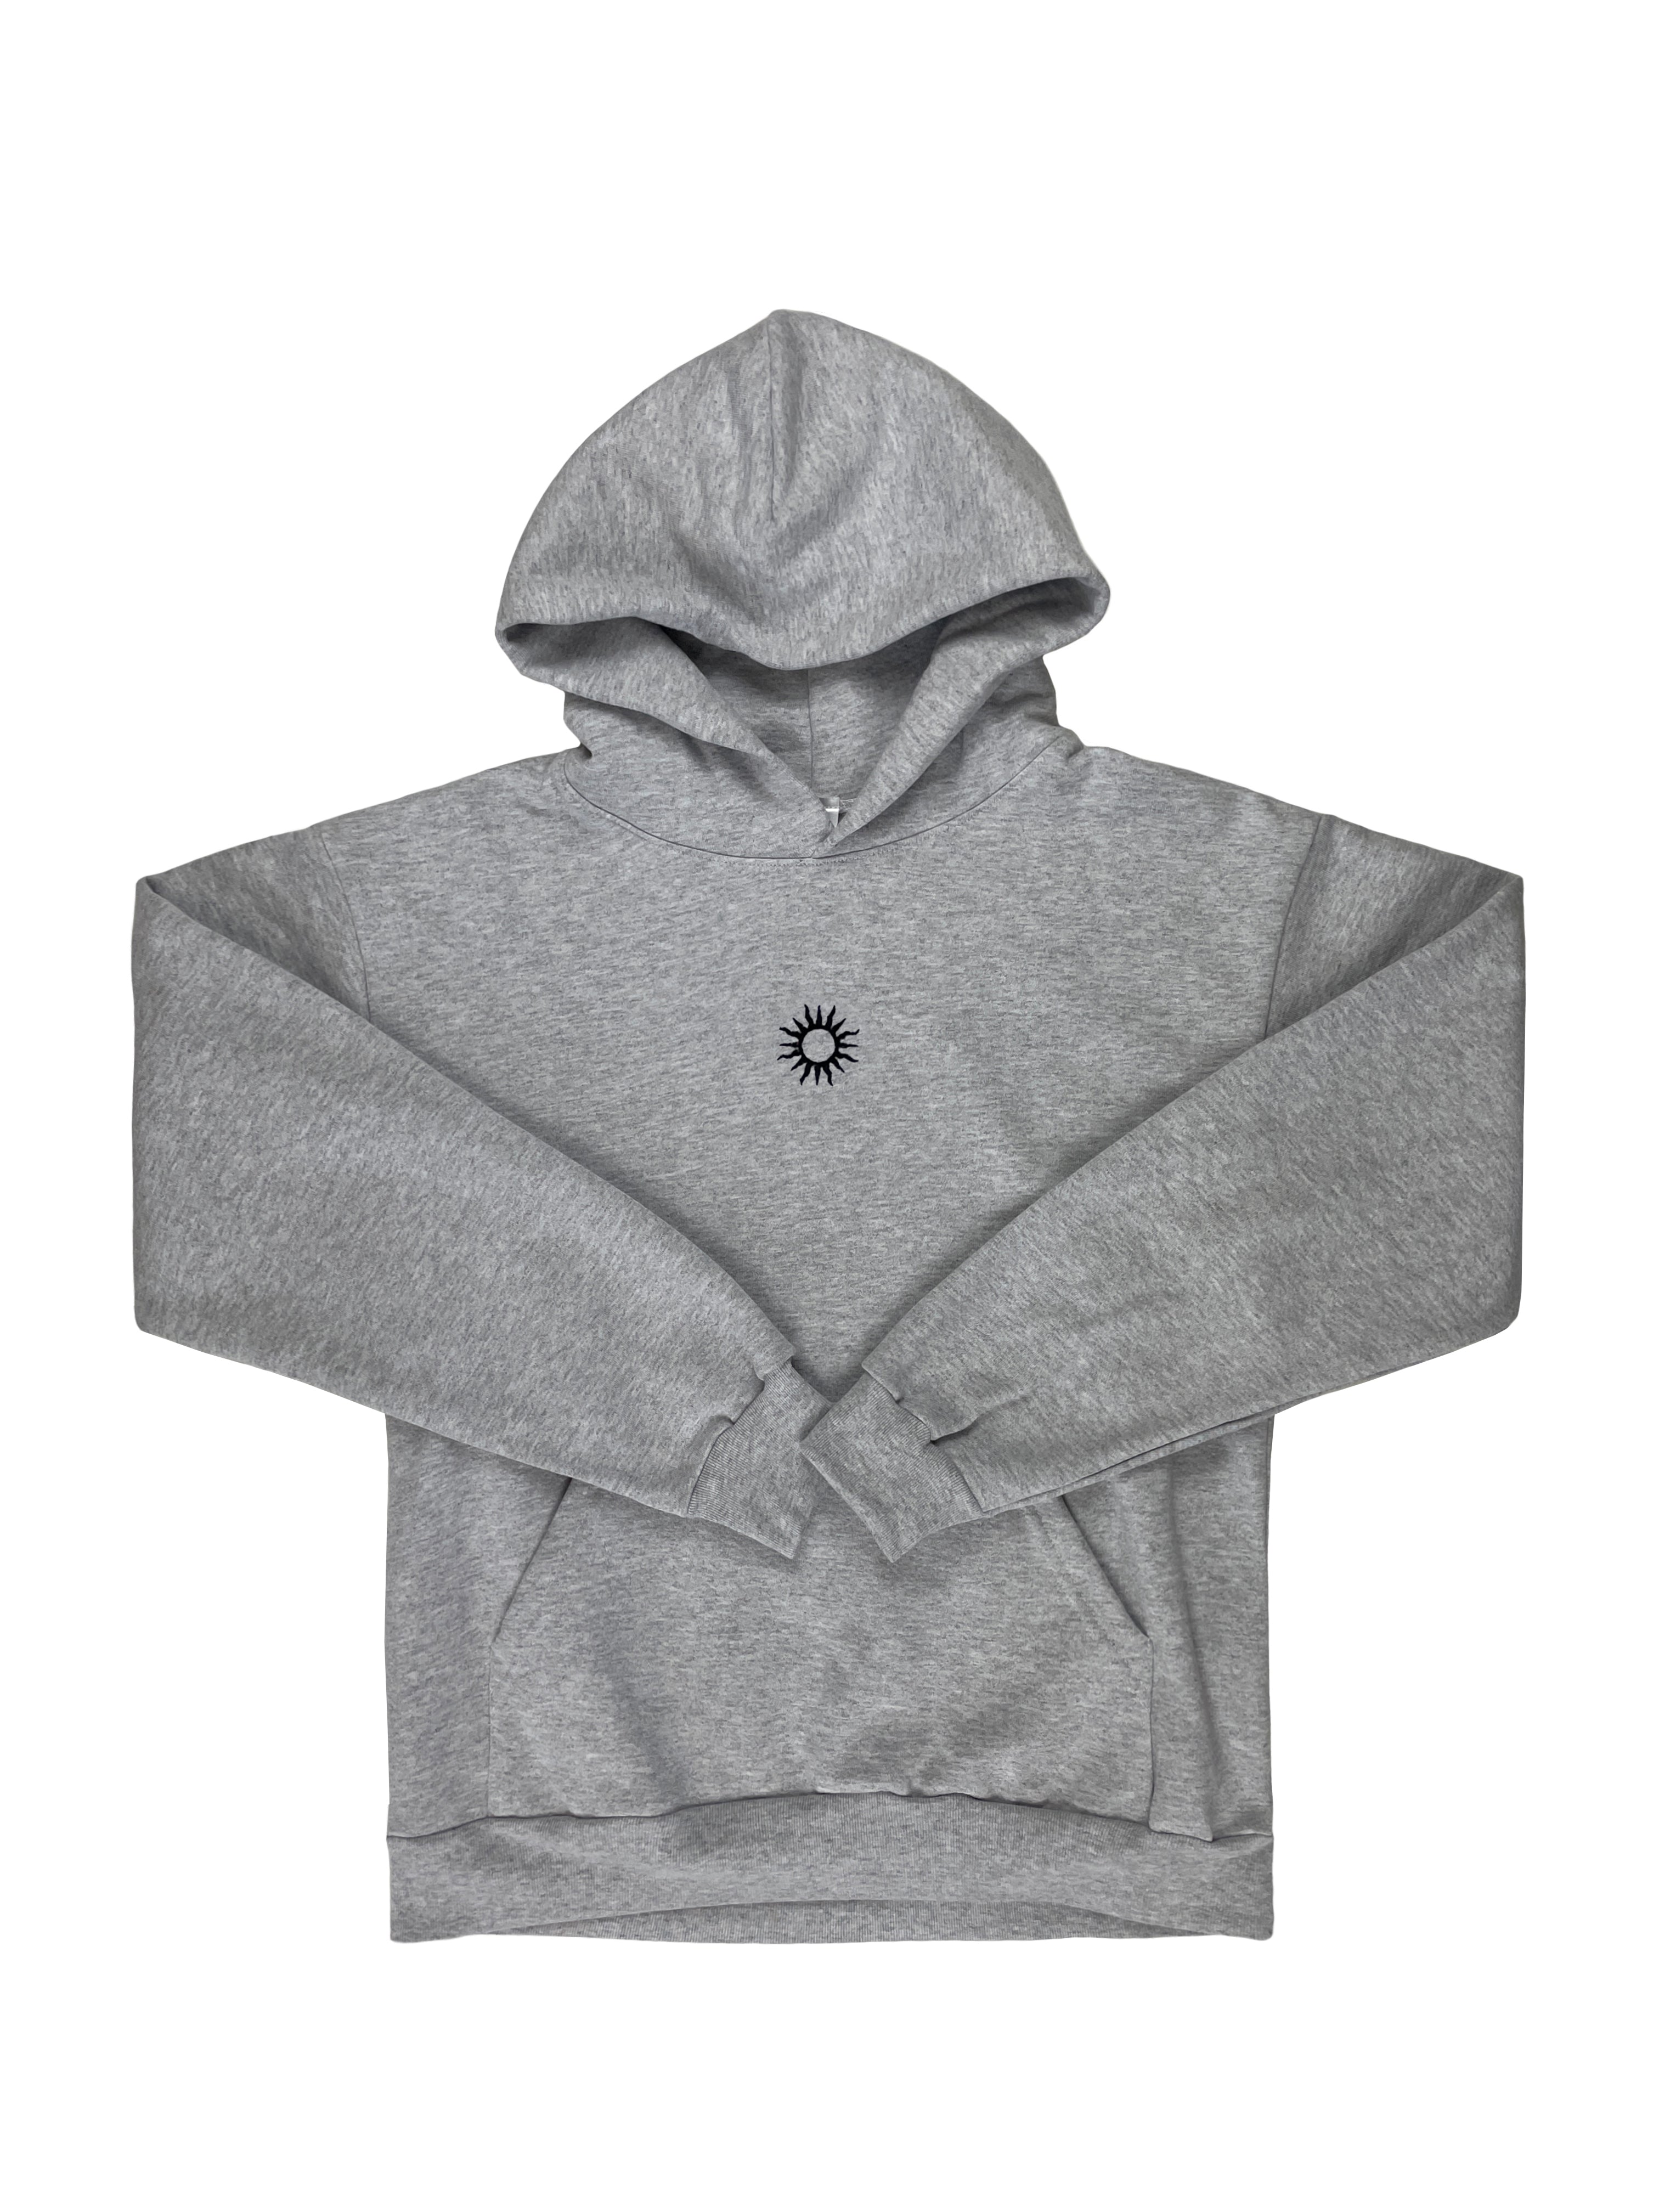 grey 100% cotton hoodie with a black embroidered sun in the centre of the chest